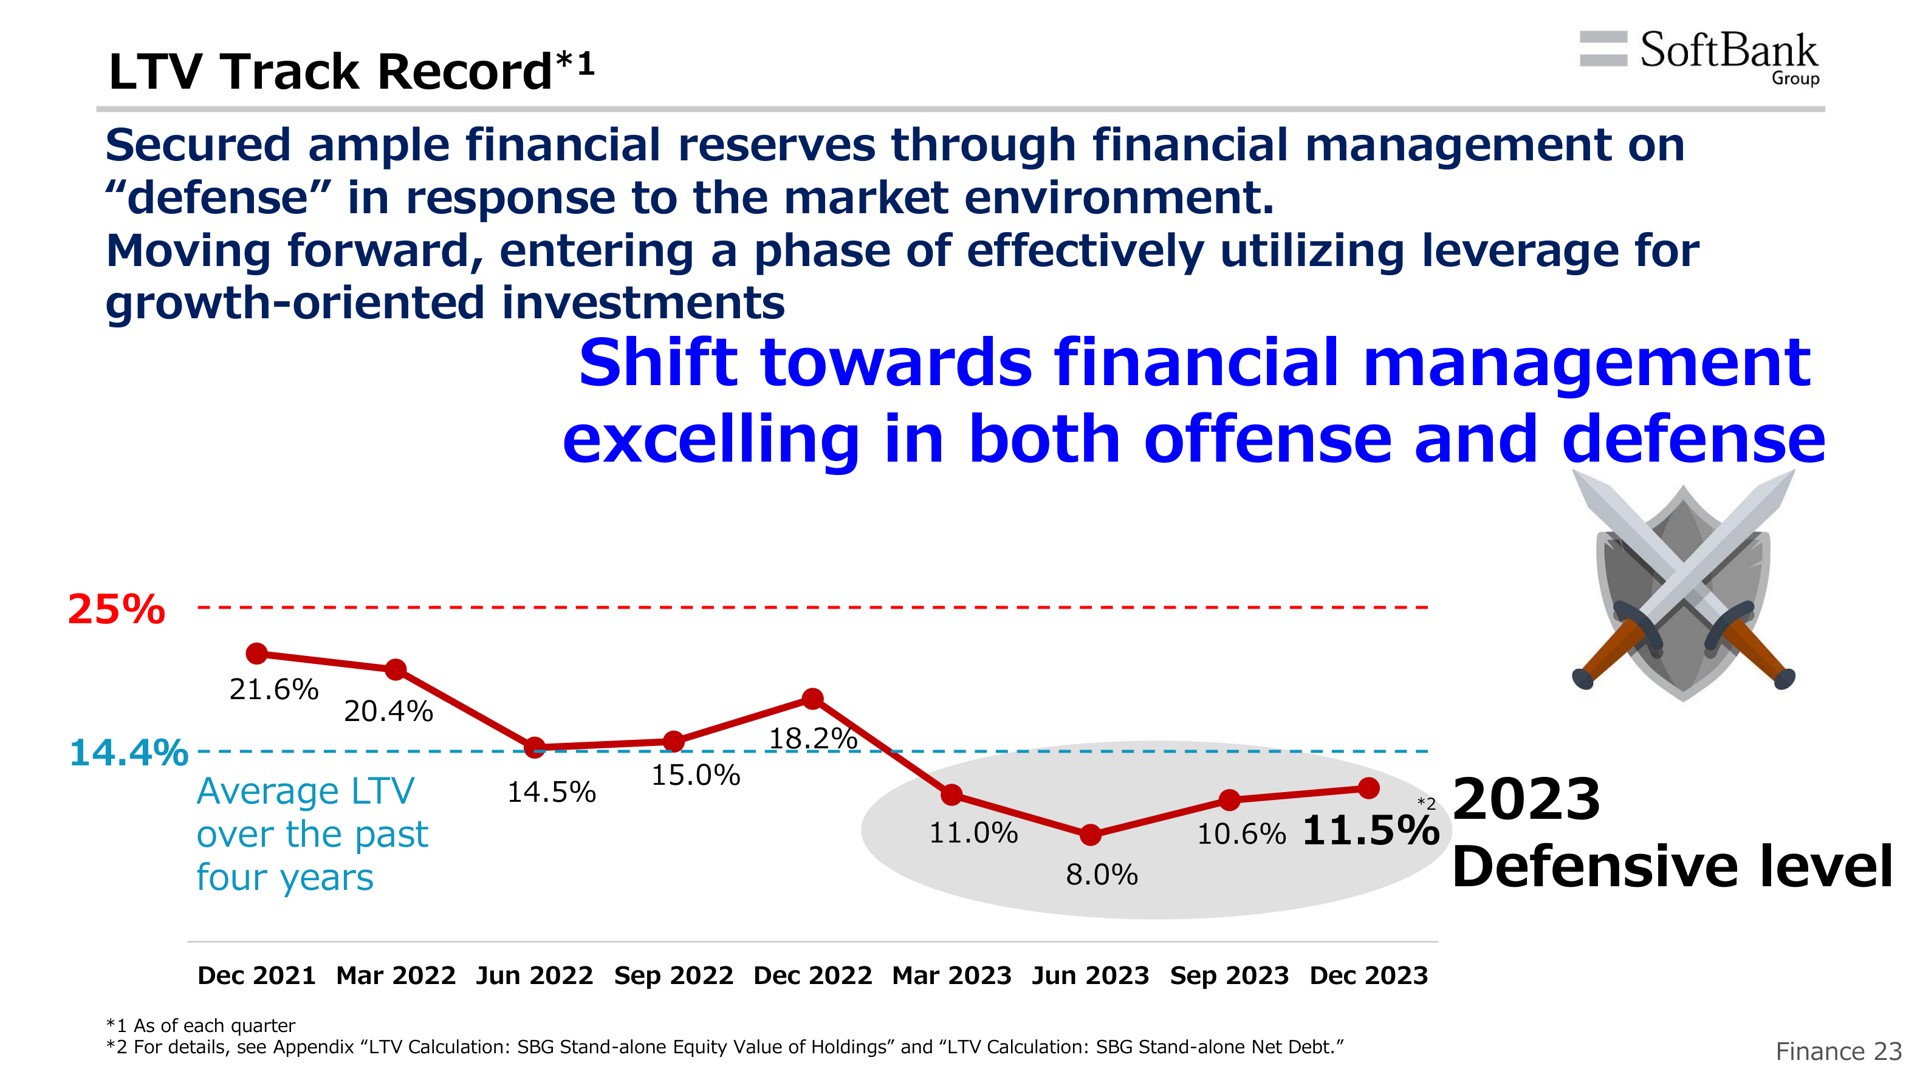 track record secured ample financial reserves through financial management on defense in response to the market environment moving forward entering a phase of effectively utilizing leverage for growth oriented investments shift towards financial management excelling in both offense and defense defensive level | SoftBank